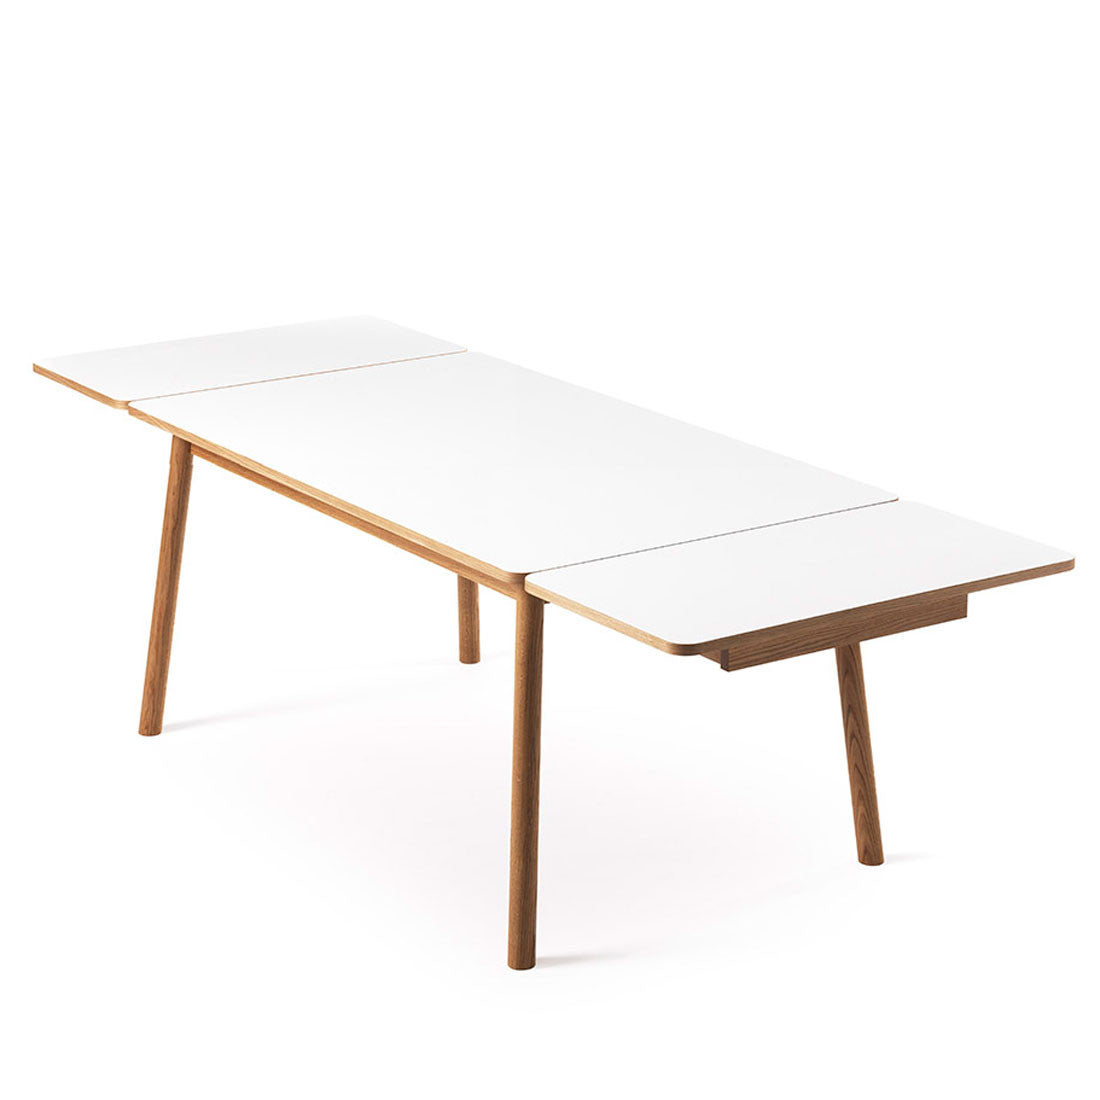 Dino+ Extending Dining Table by Zweed